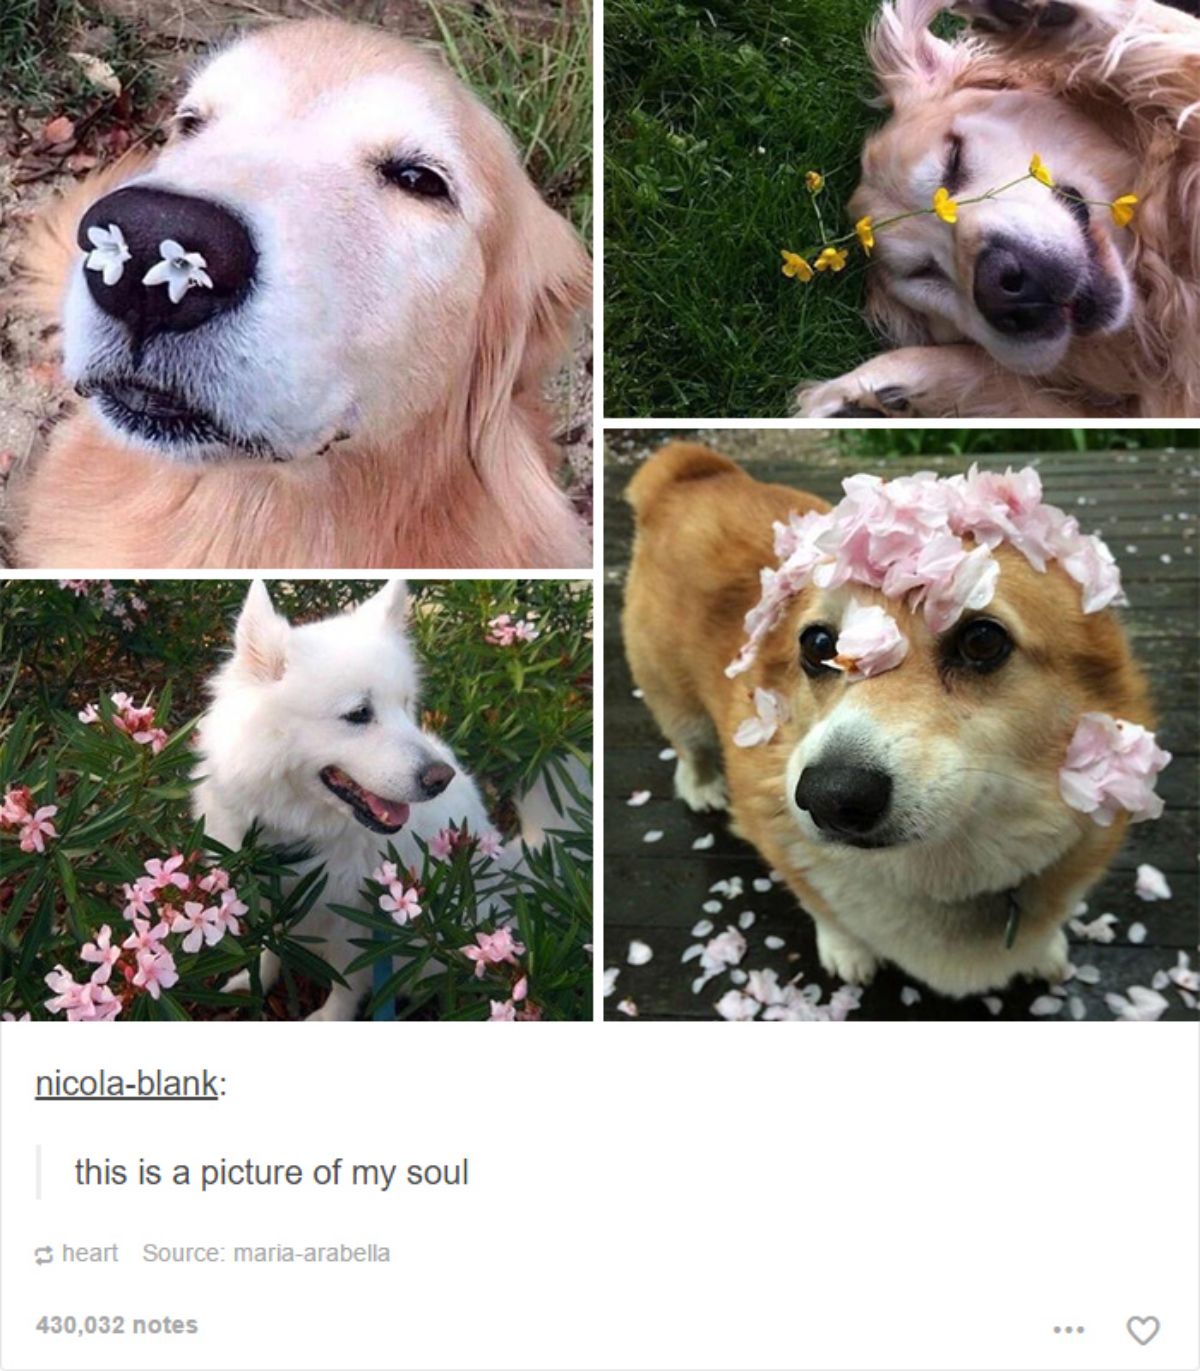 2 photos of a golden retriever, 1 fluffy white dog and 1 brown and white corgi with flowers on and around them